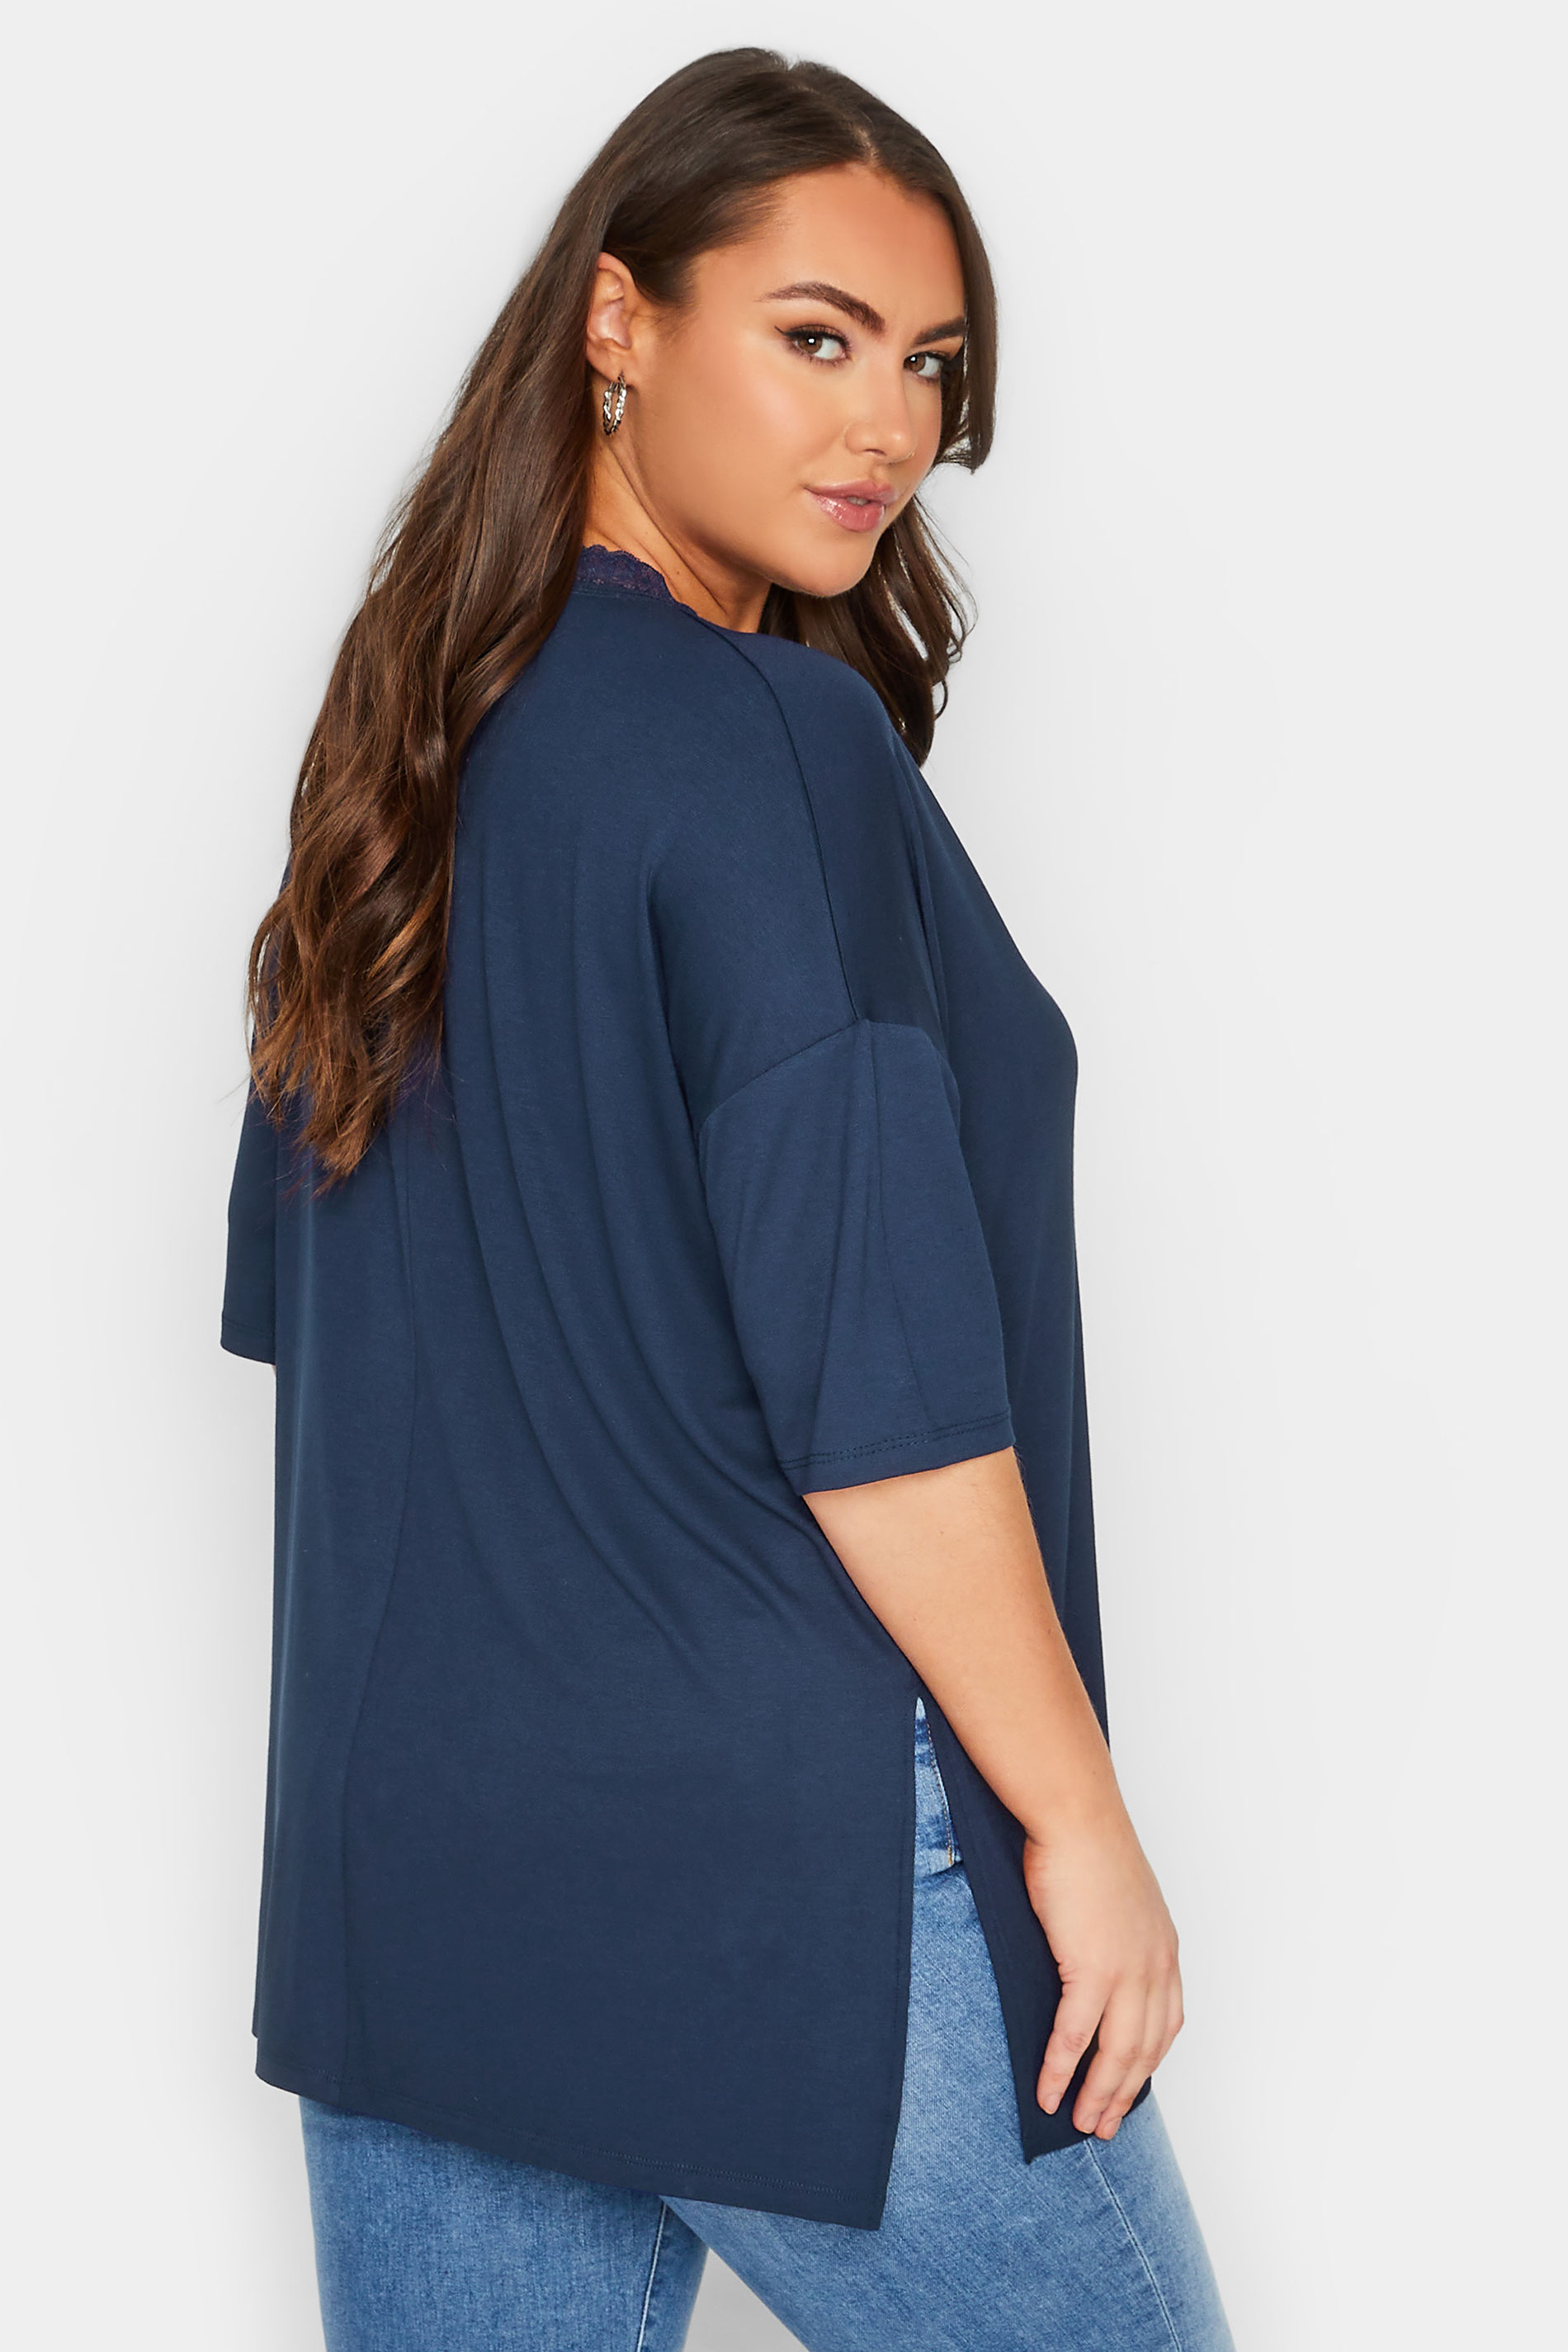 YOURS Plus Size Curve Navy Blue Lace Collar T-Shirt | Yours Clothing  3